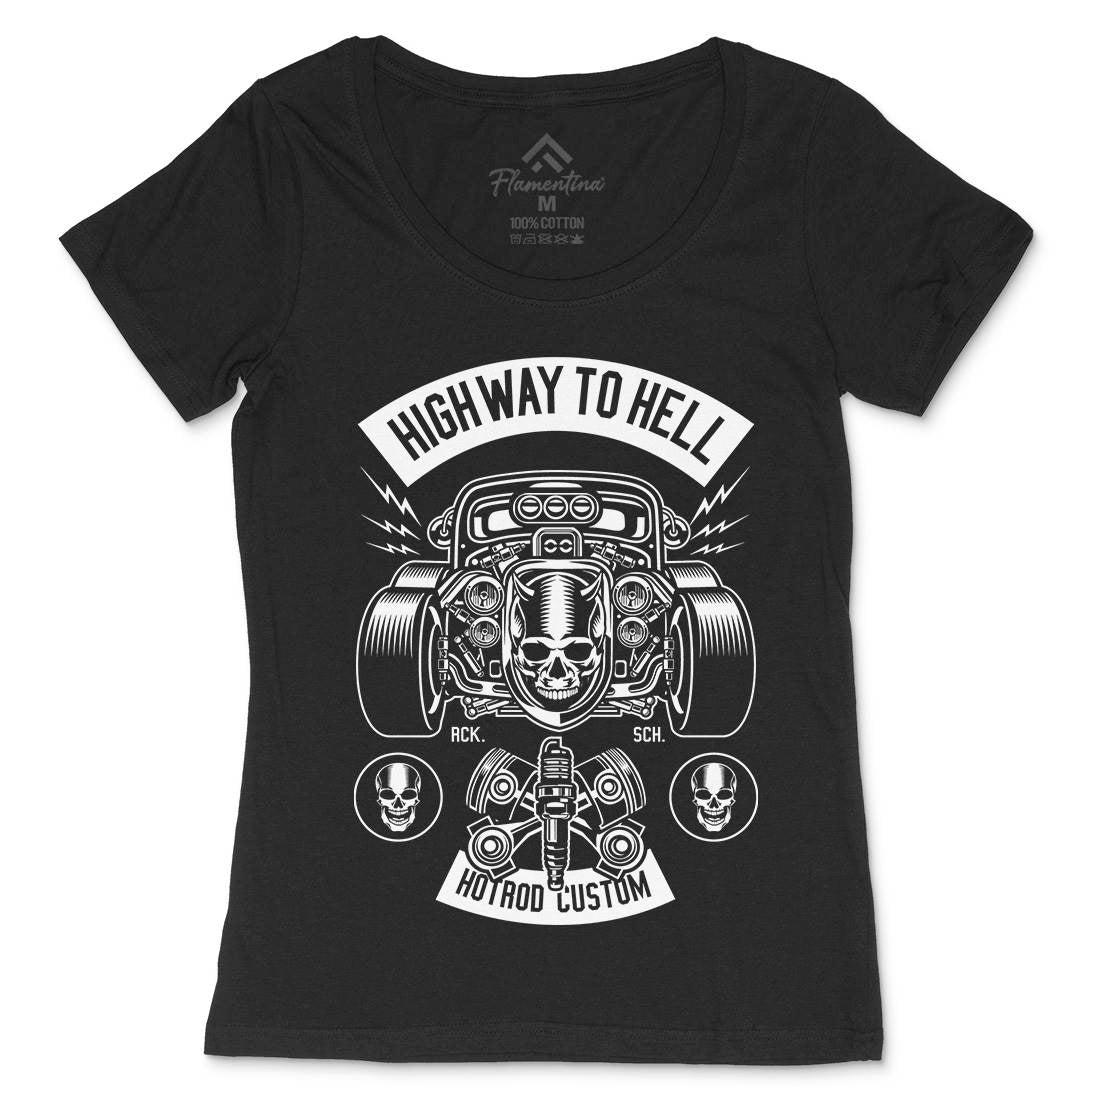 Highway To Hell Womens Scoop Neck T-Shirt Cars B556